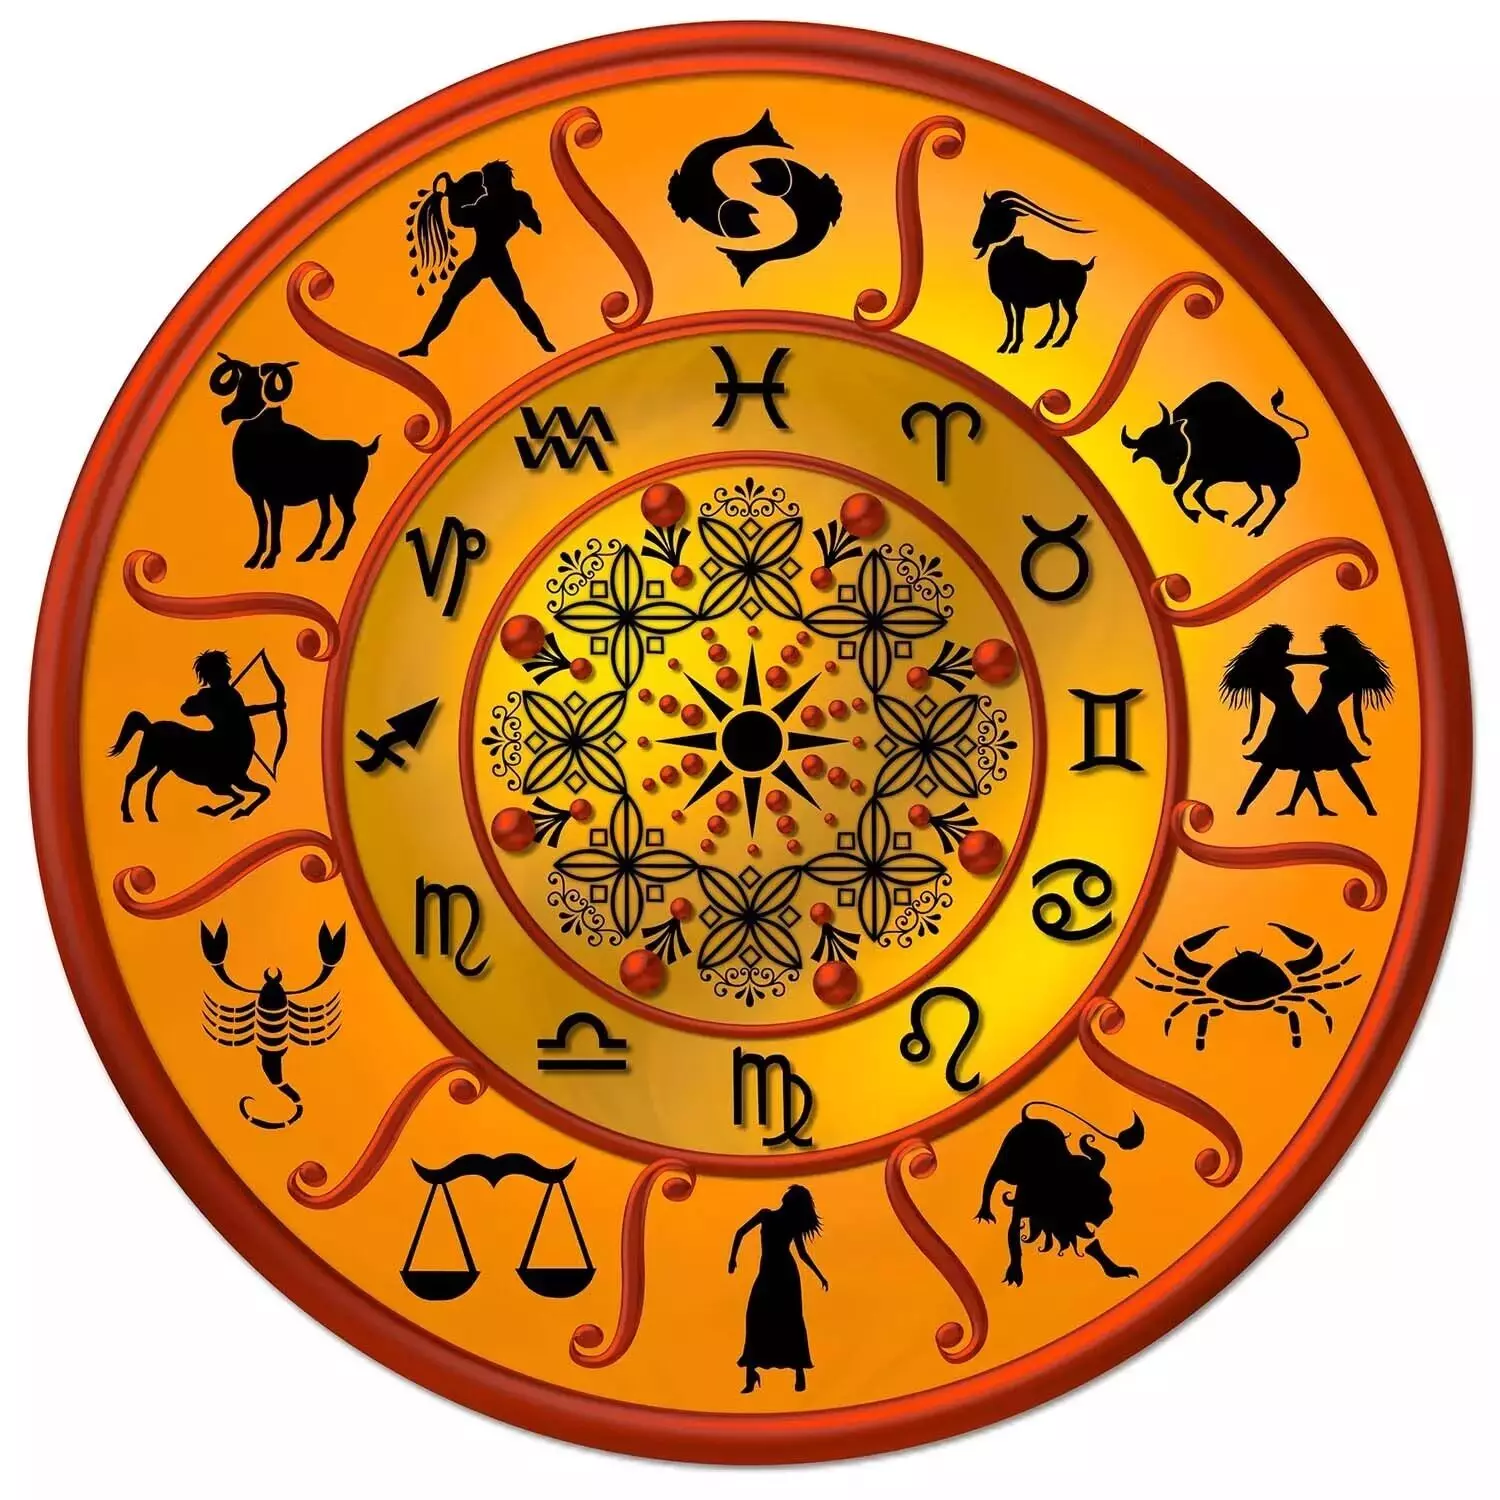 03 September  – Know your todays horoscope